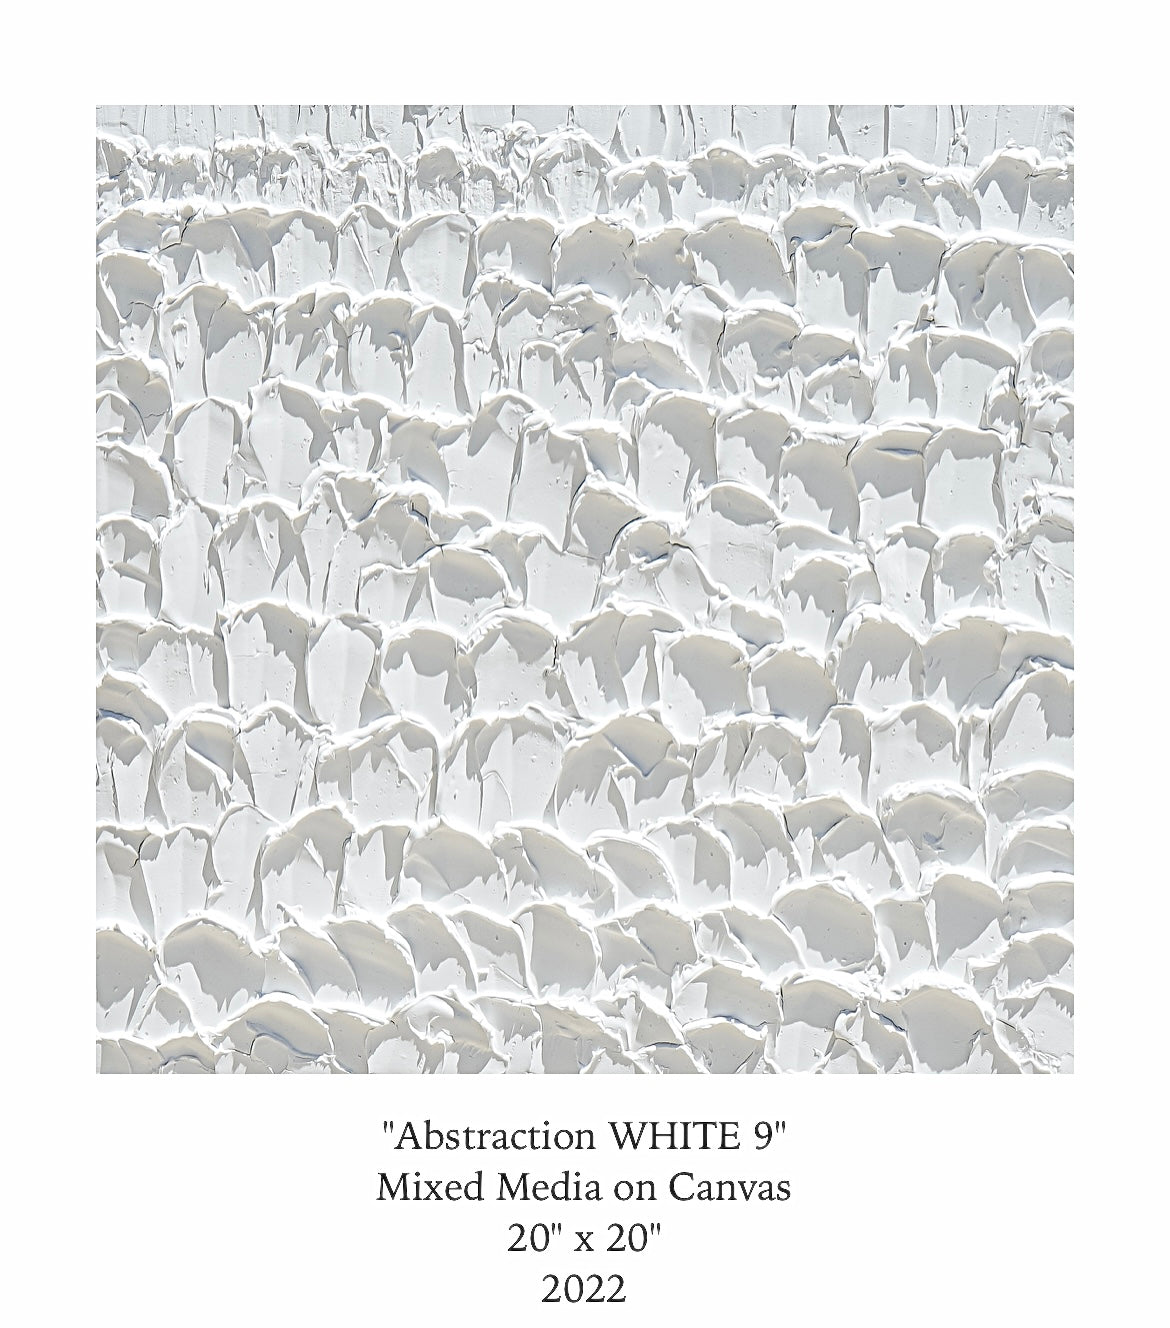 Abstraction WHITE 9 - "Aromatic Harmony with Nature"